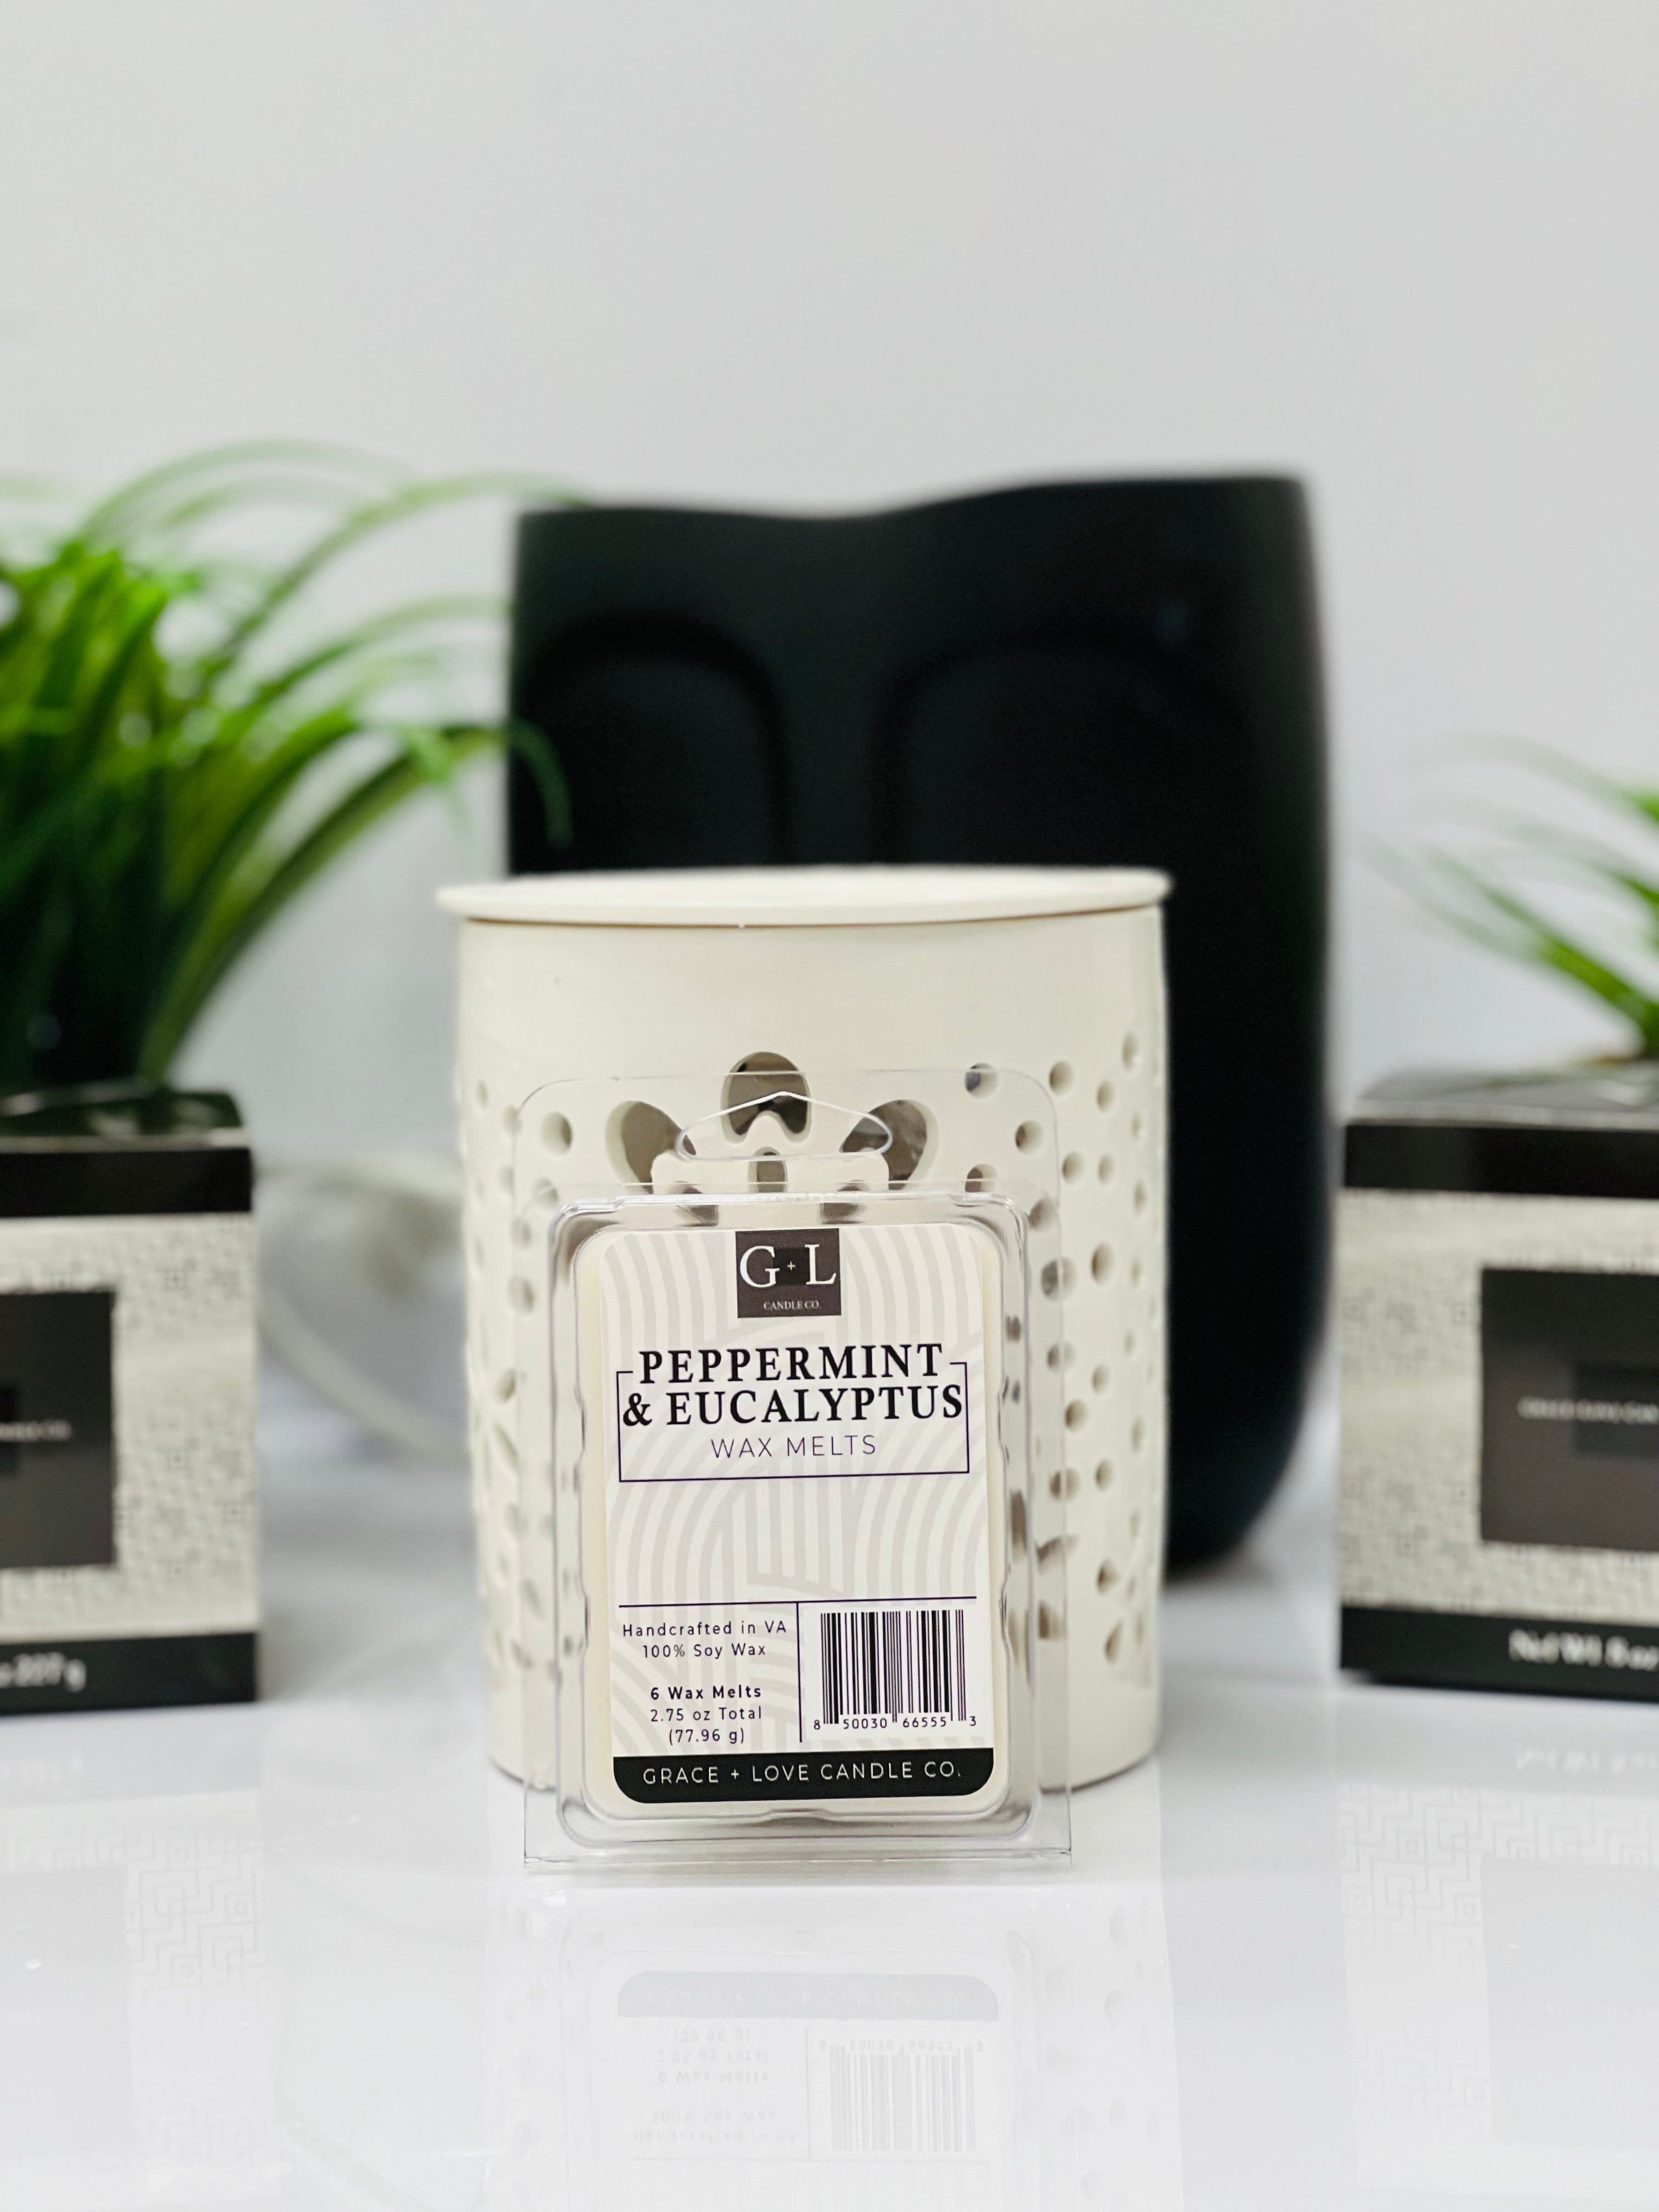 Peppermint & Eucalyptus Wax Melts | Country Lane Candles